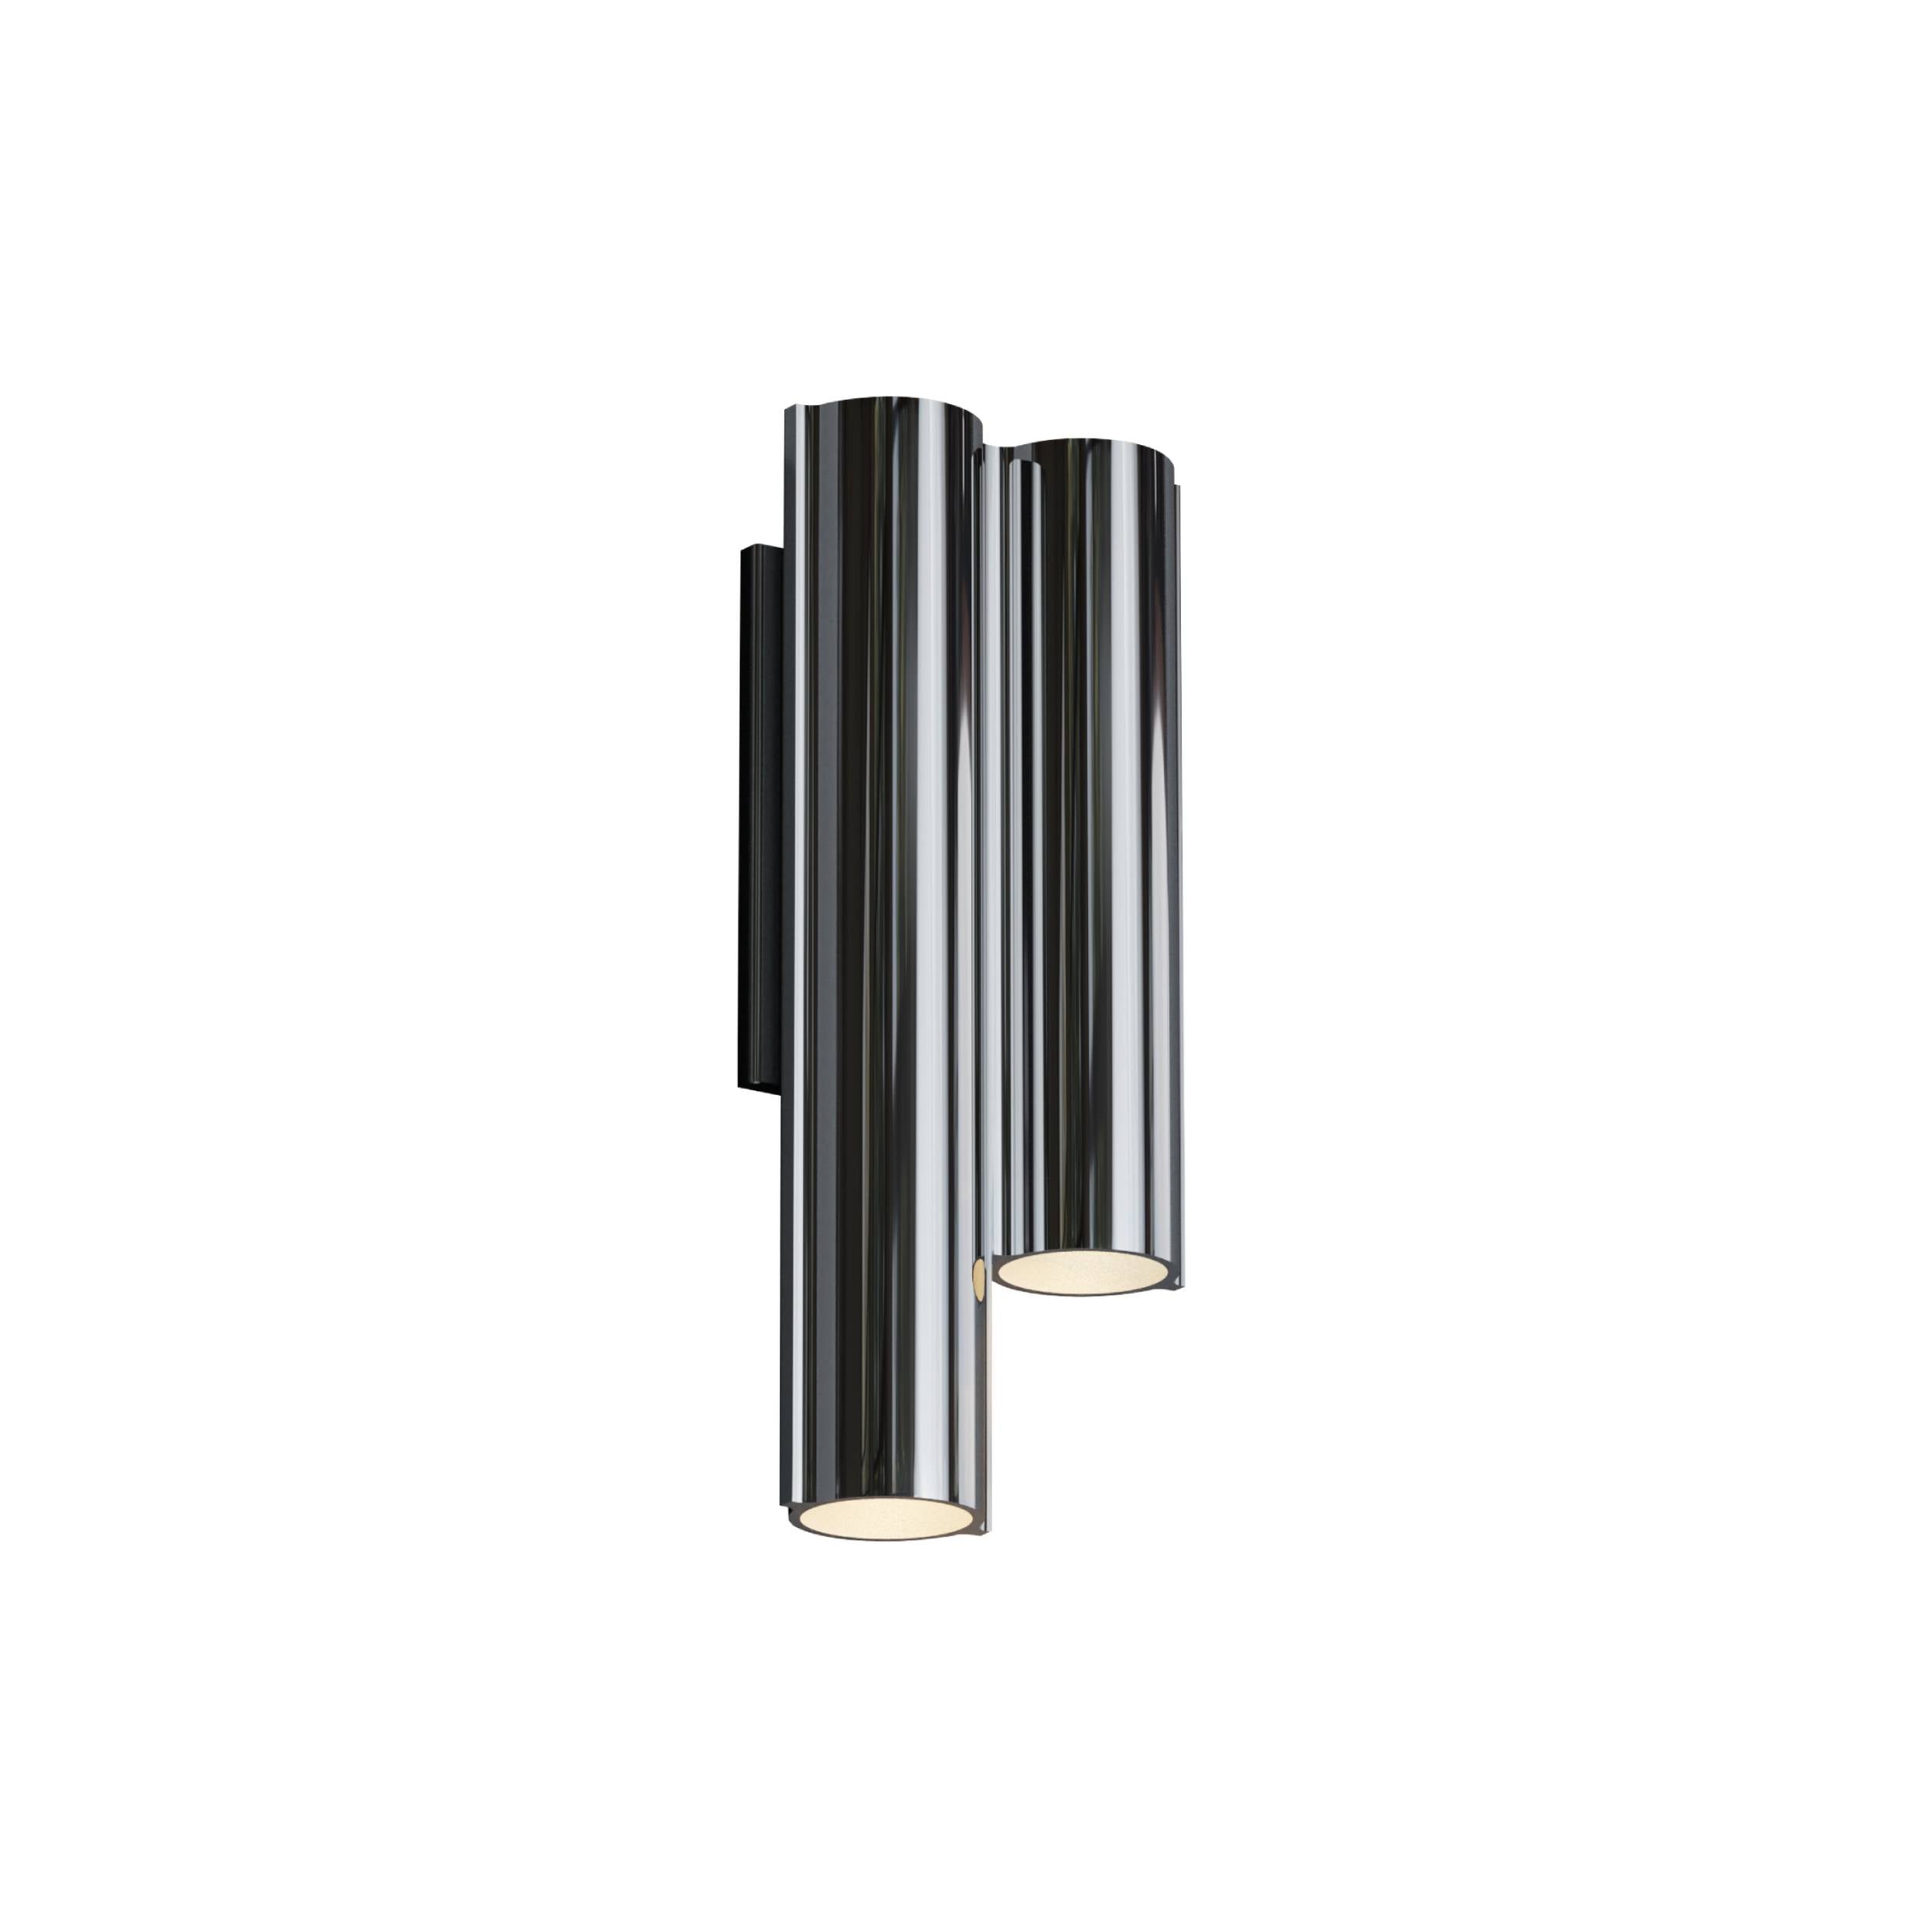 Silo 2WC Wall Light: Downlight with Uplight + Mirror Polished Aluminum